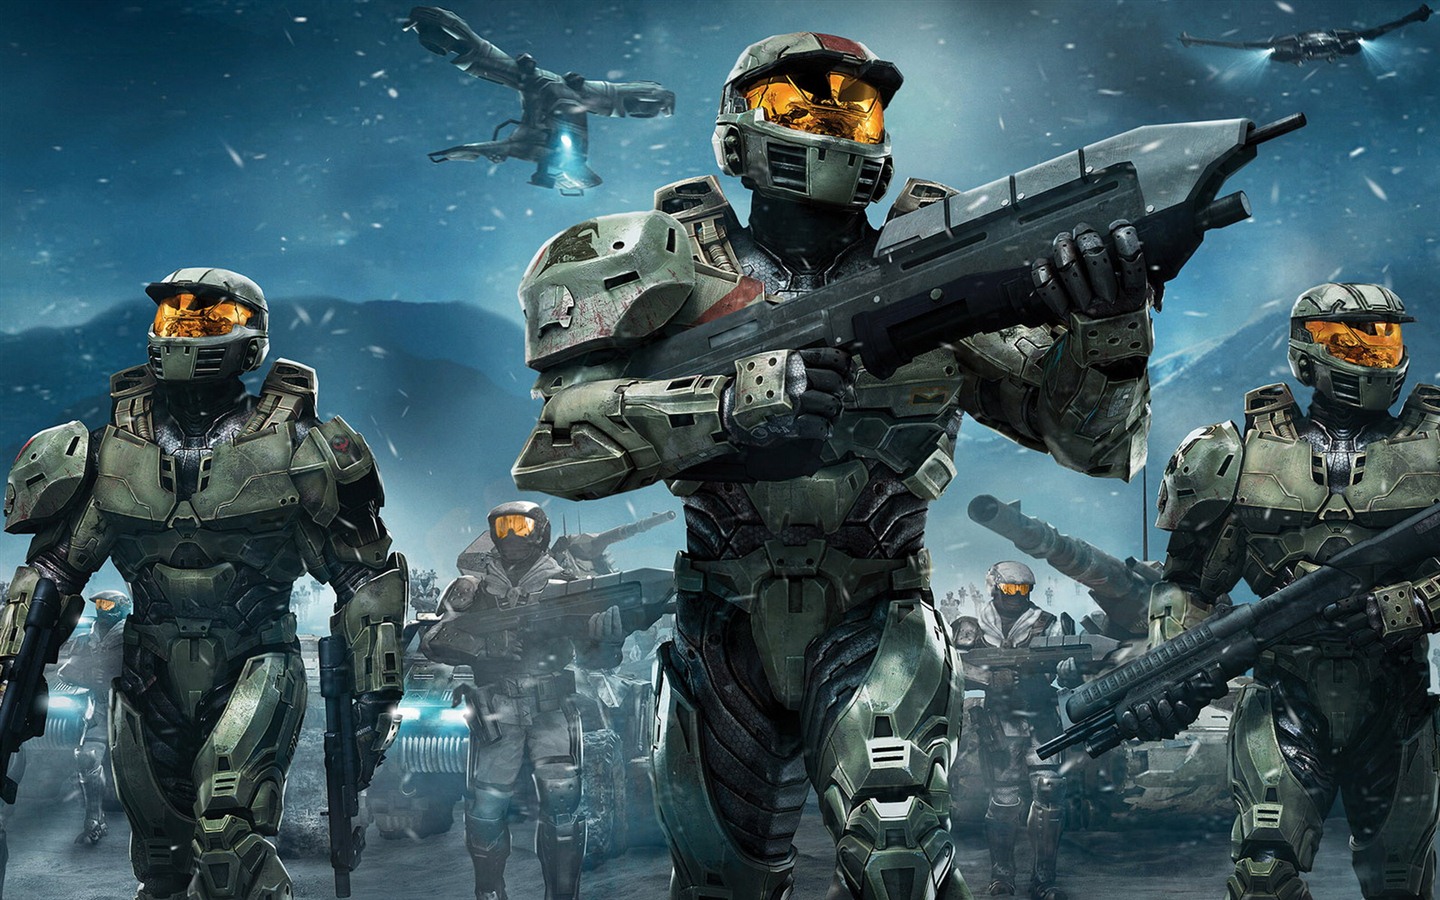 Halo game HD wallpapers #25 - 1440x900